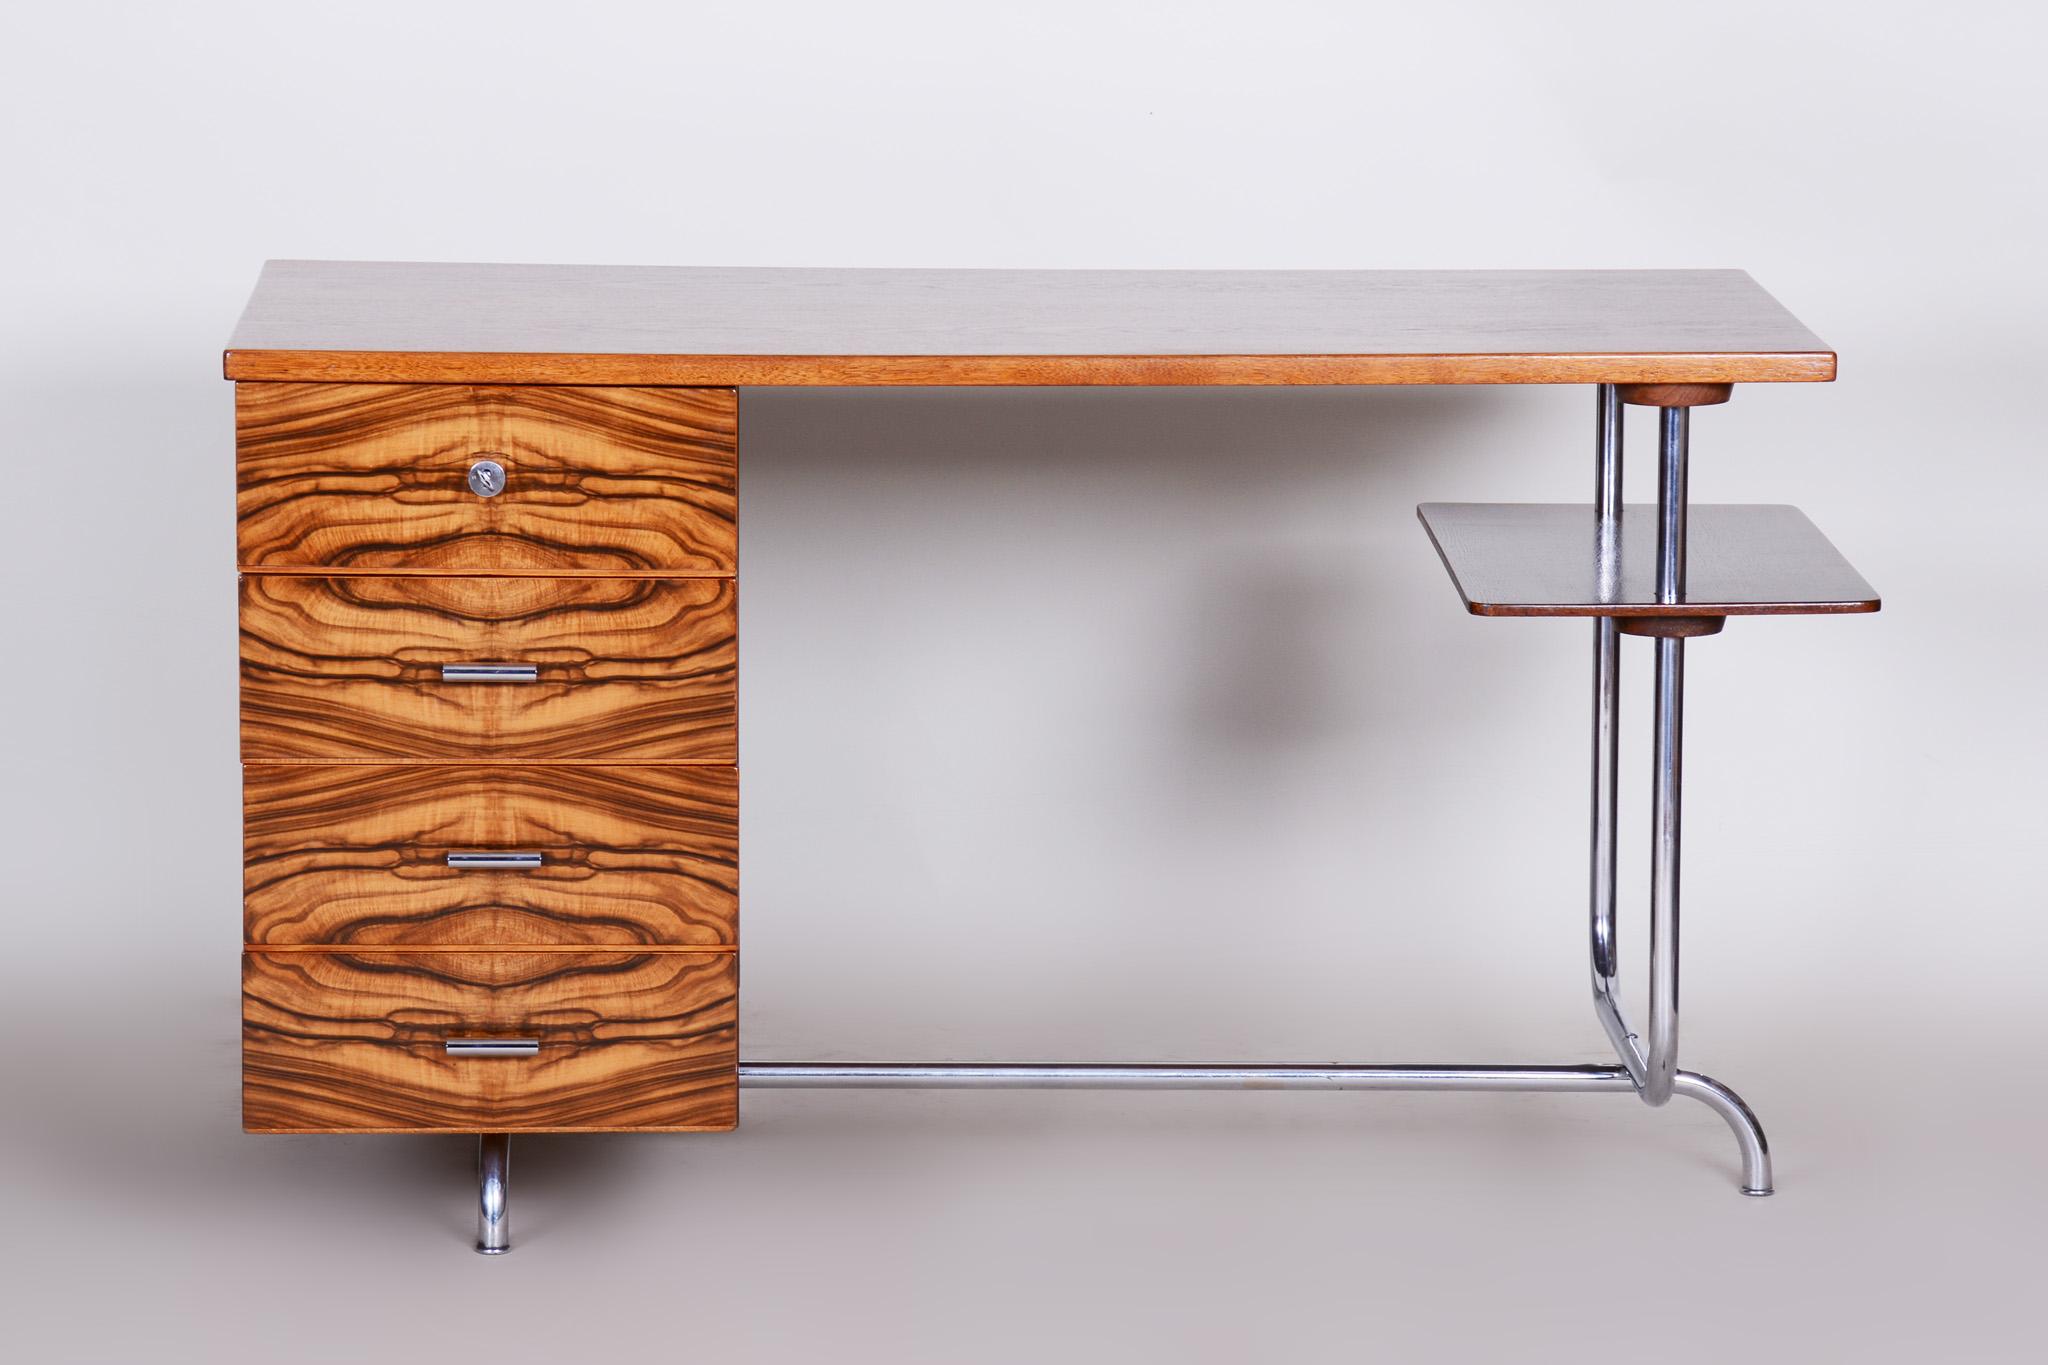 One of the most successful writing desk made in United Arts & Crafts Manufacture (UP) in Brno.
Designed by Czech architect Jindrich Halabala.
Material: Walnut, oak and chrome-plated steel
Completely professionally restored.

Original catalog